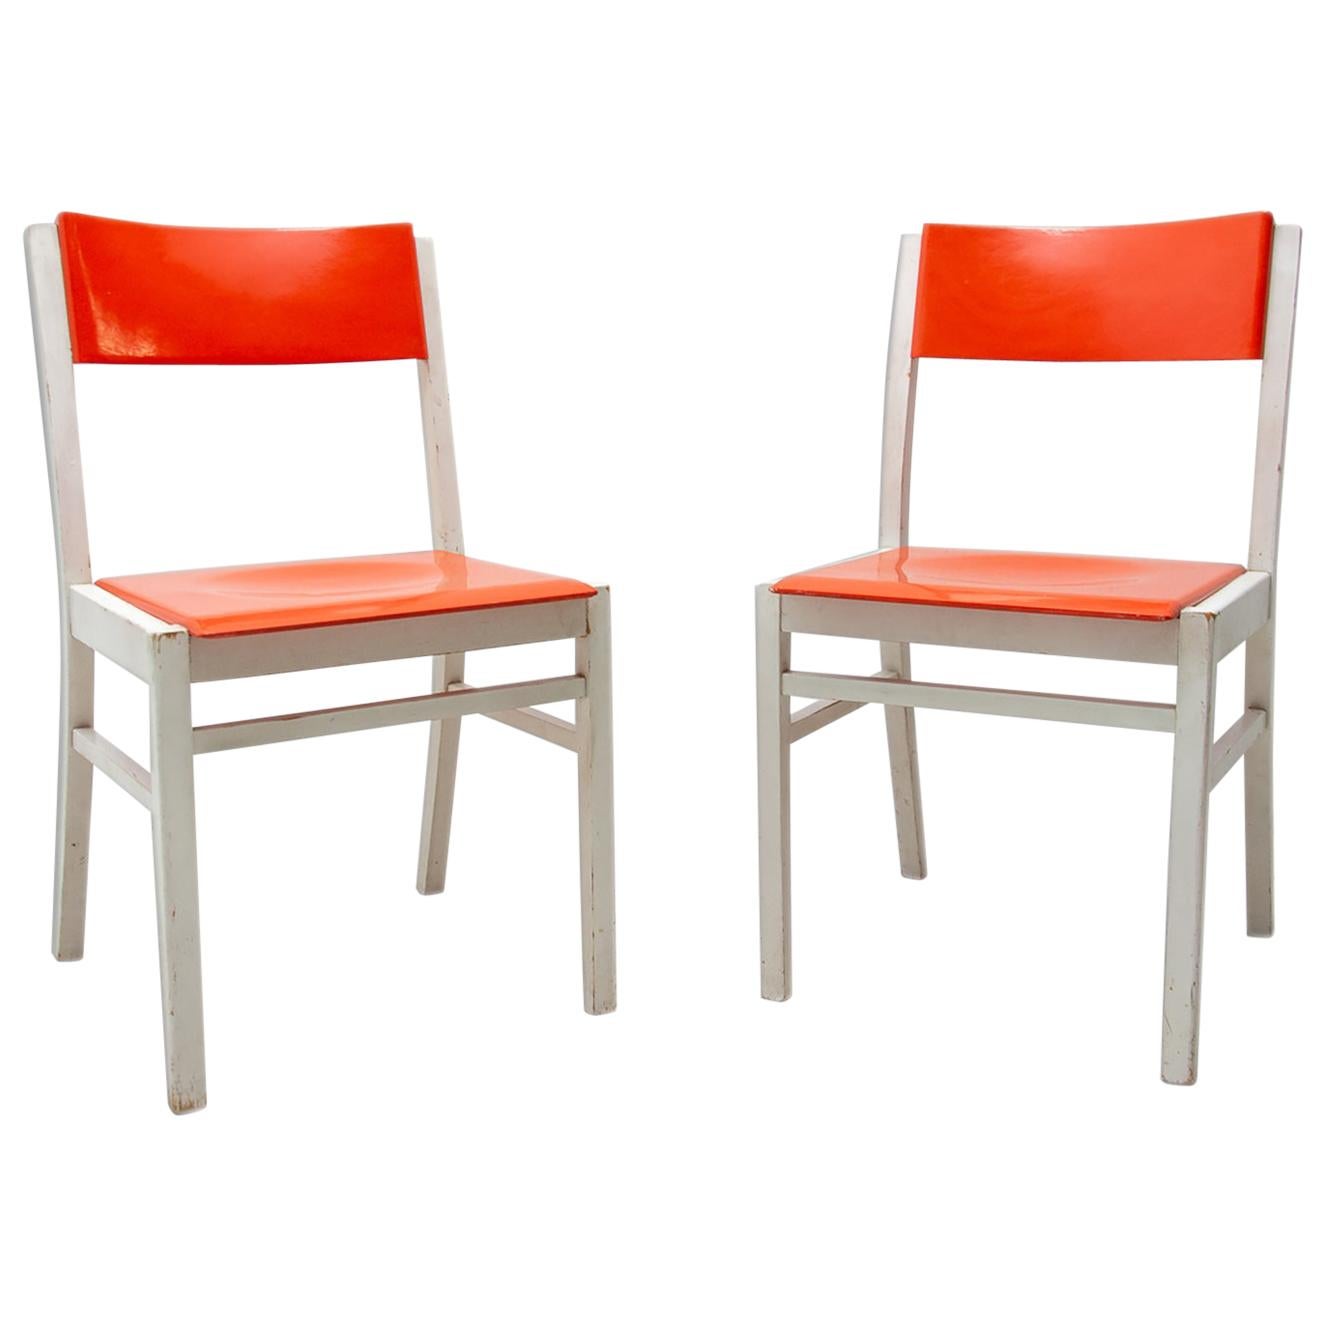 Pair of Midcentury Dining Chairs TON, 1960s, Czechoslovakia For Sale